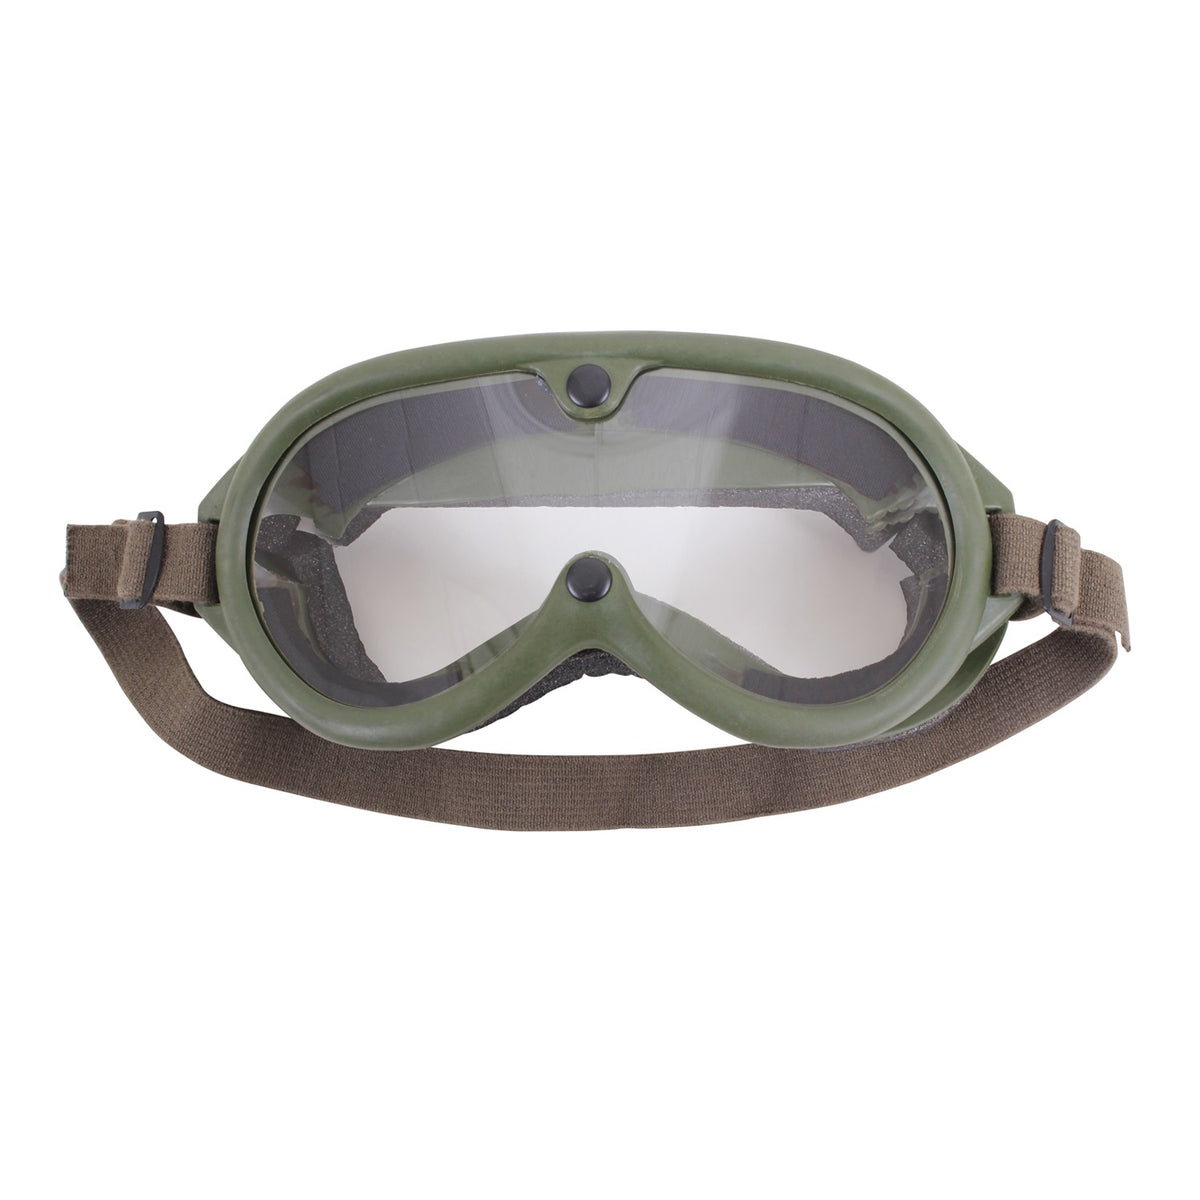 Rothco G.I. Type Sun, Wind & Dust Goggles Olive Drab